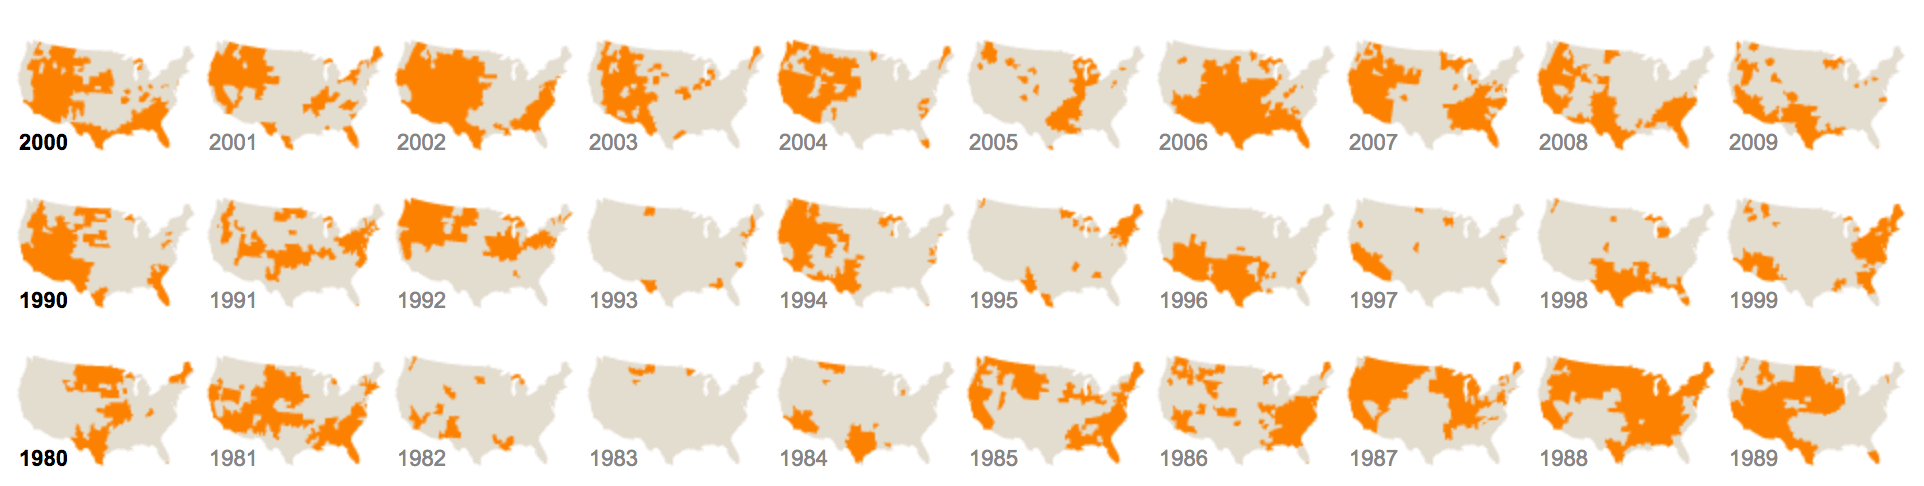 An example of a small multiple map of the USA, from the New York Times.